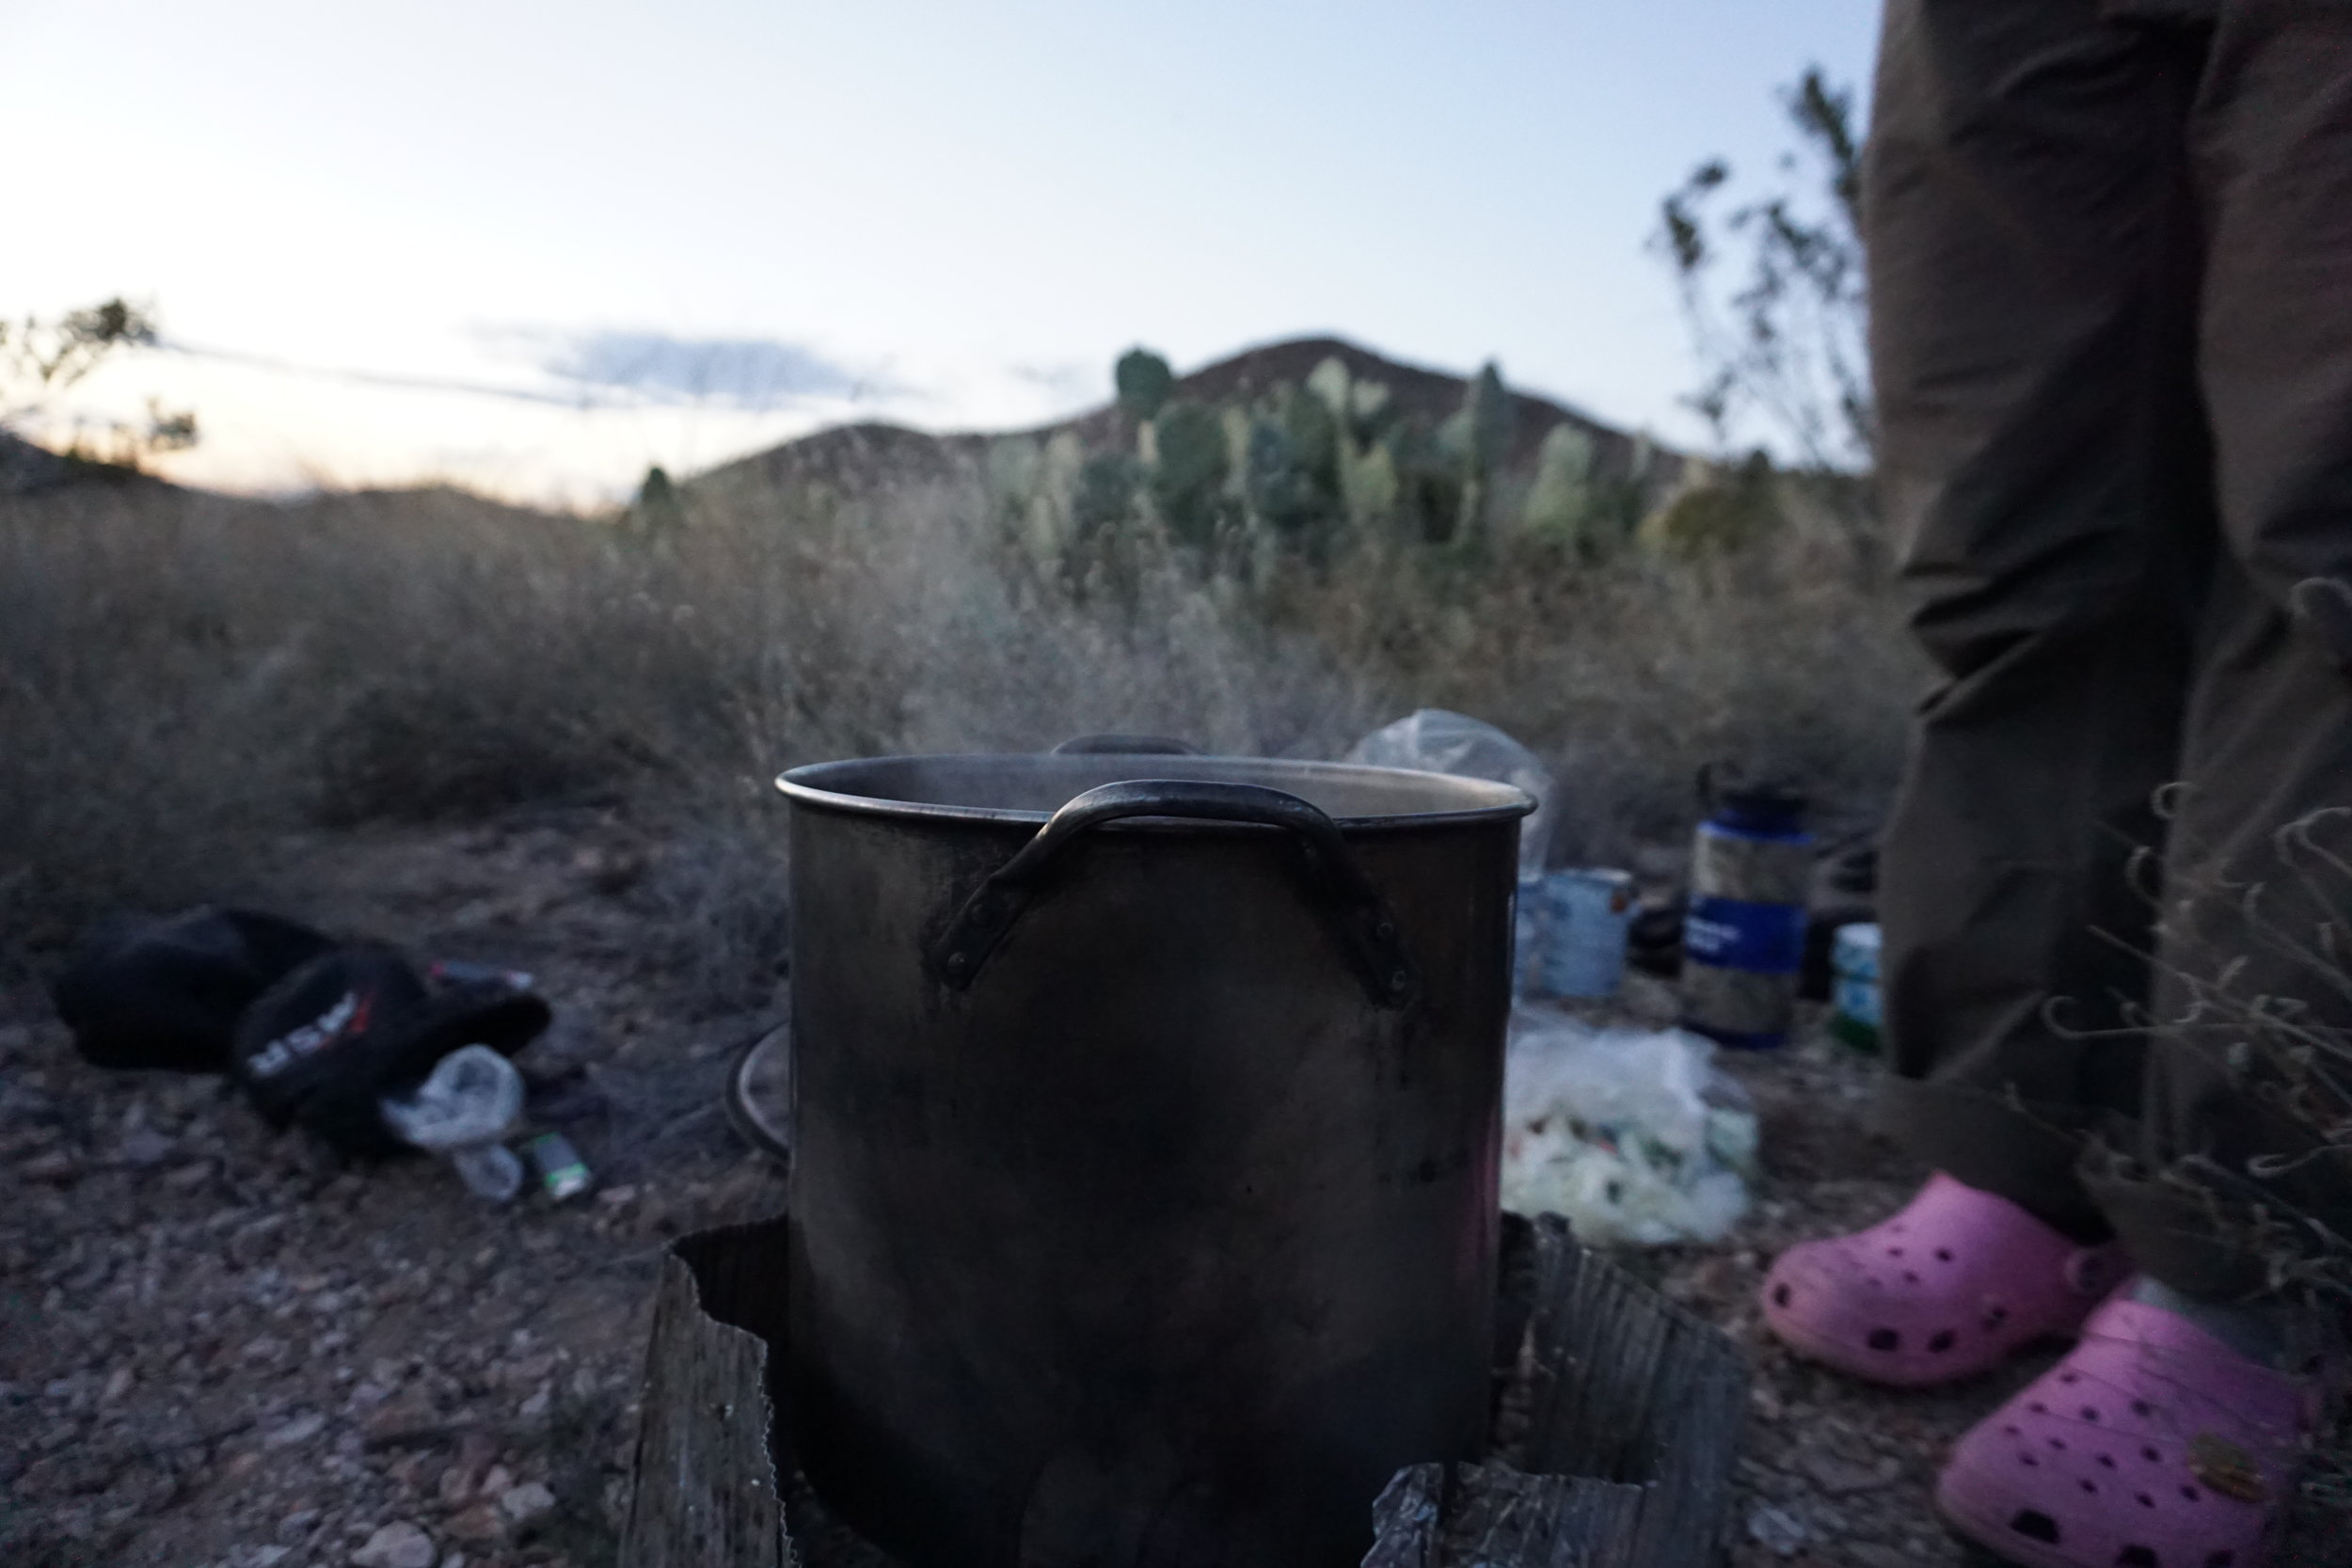 A cooking pot on the ground in Texas desert